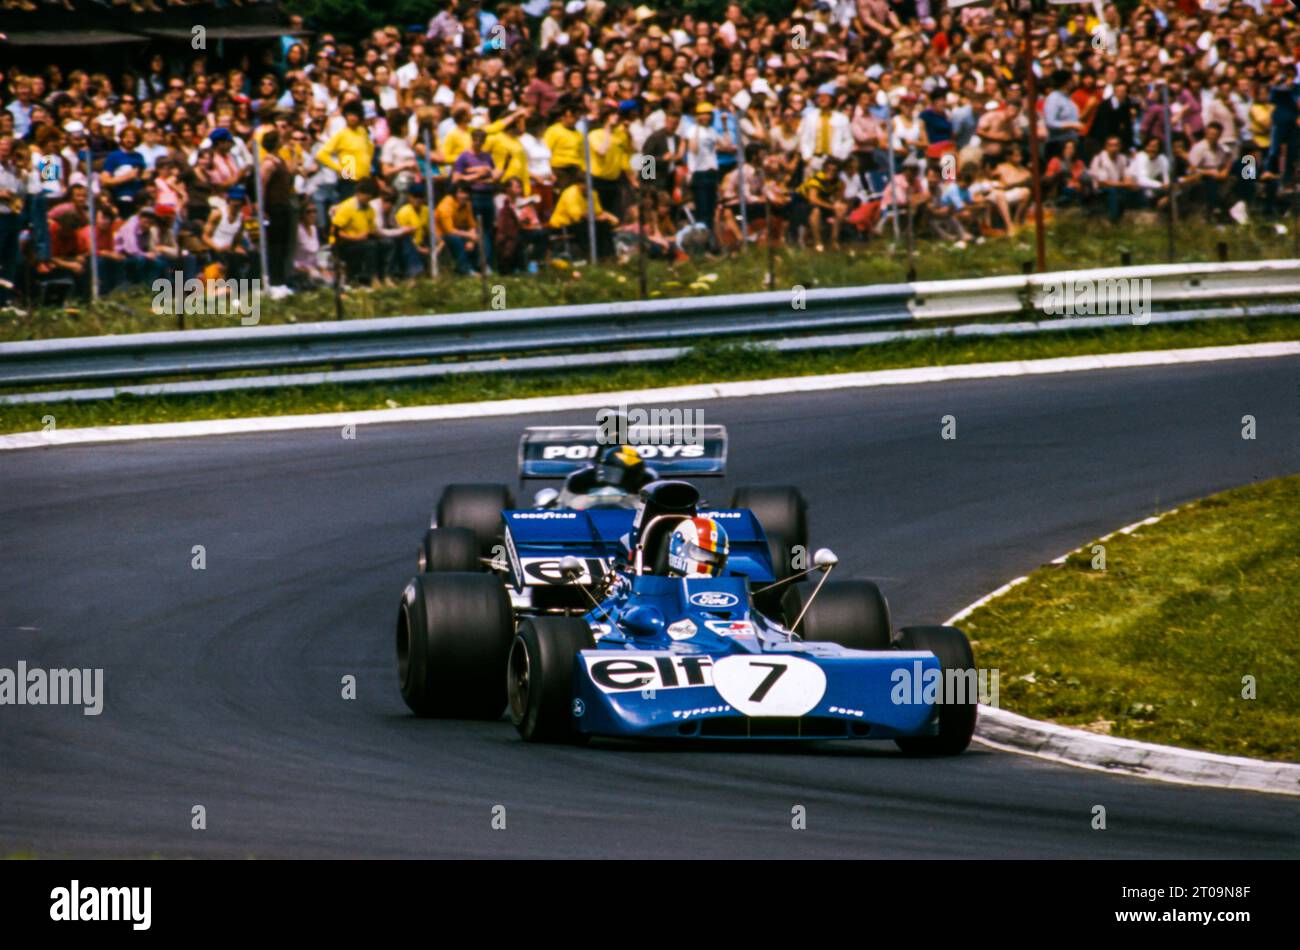 07 Cevert Francois, Elf Team Tyrrell, Tyrrell-Ford 002, action during the 1972 German Grand Prix, 8th round of the 1972 Formula One season, on the Nurburgring Nordschleife, from July 28 to 30, 1972 in Nurburg, Germany - Photo DPPI Stock Photo